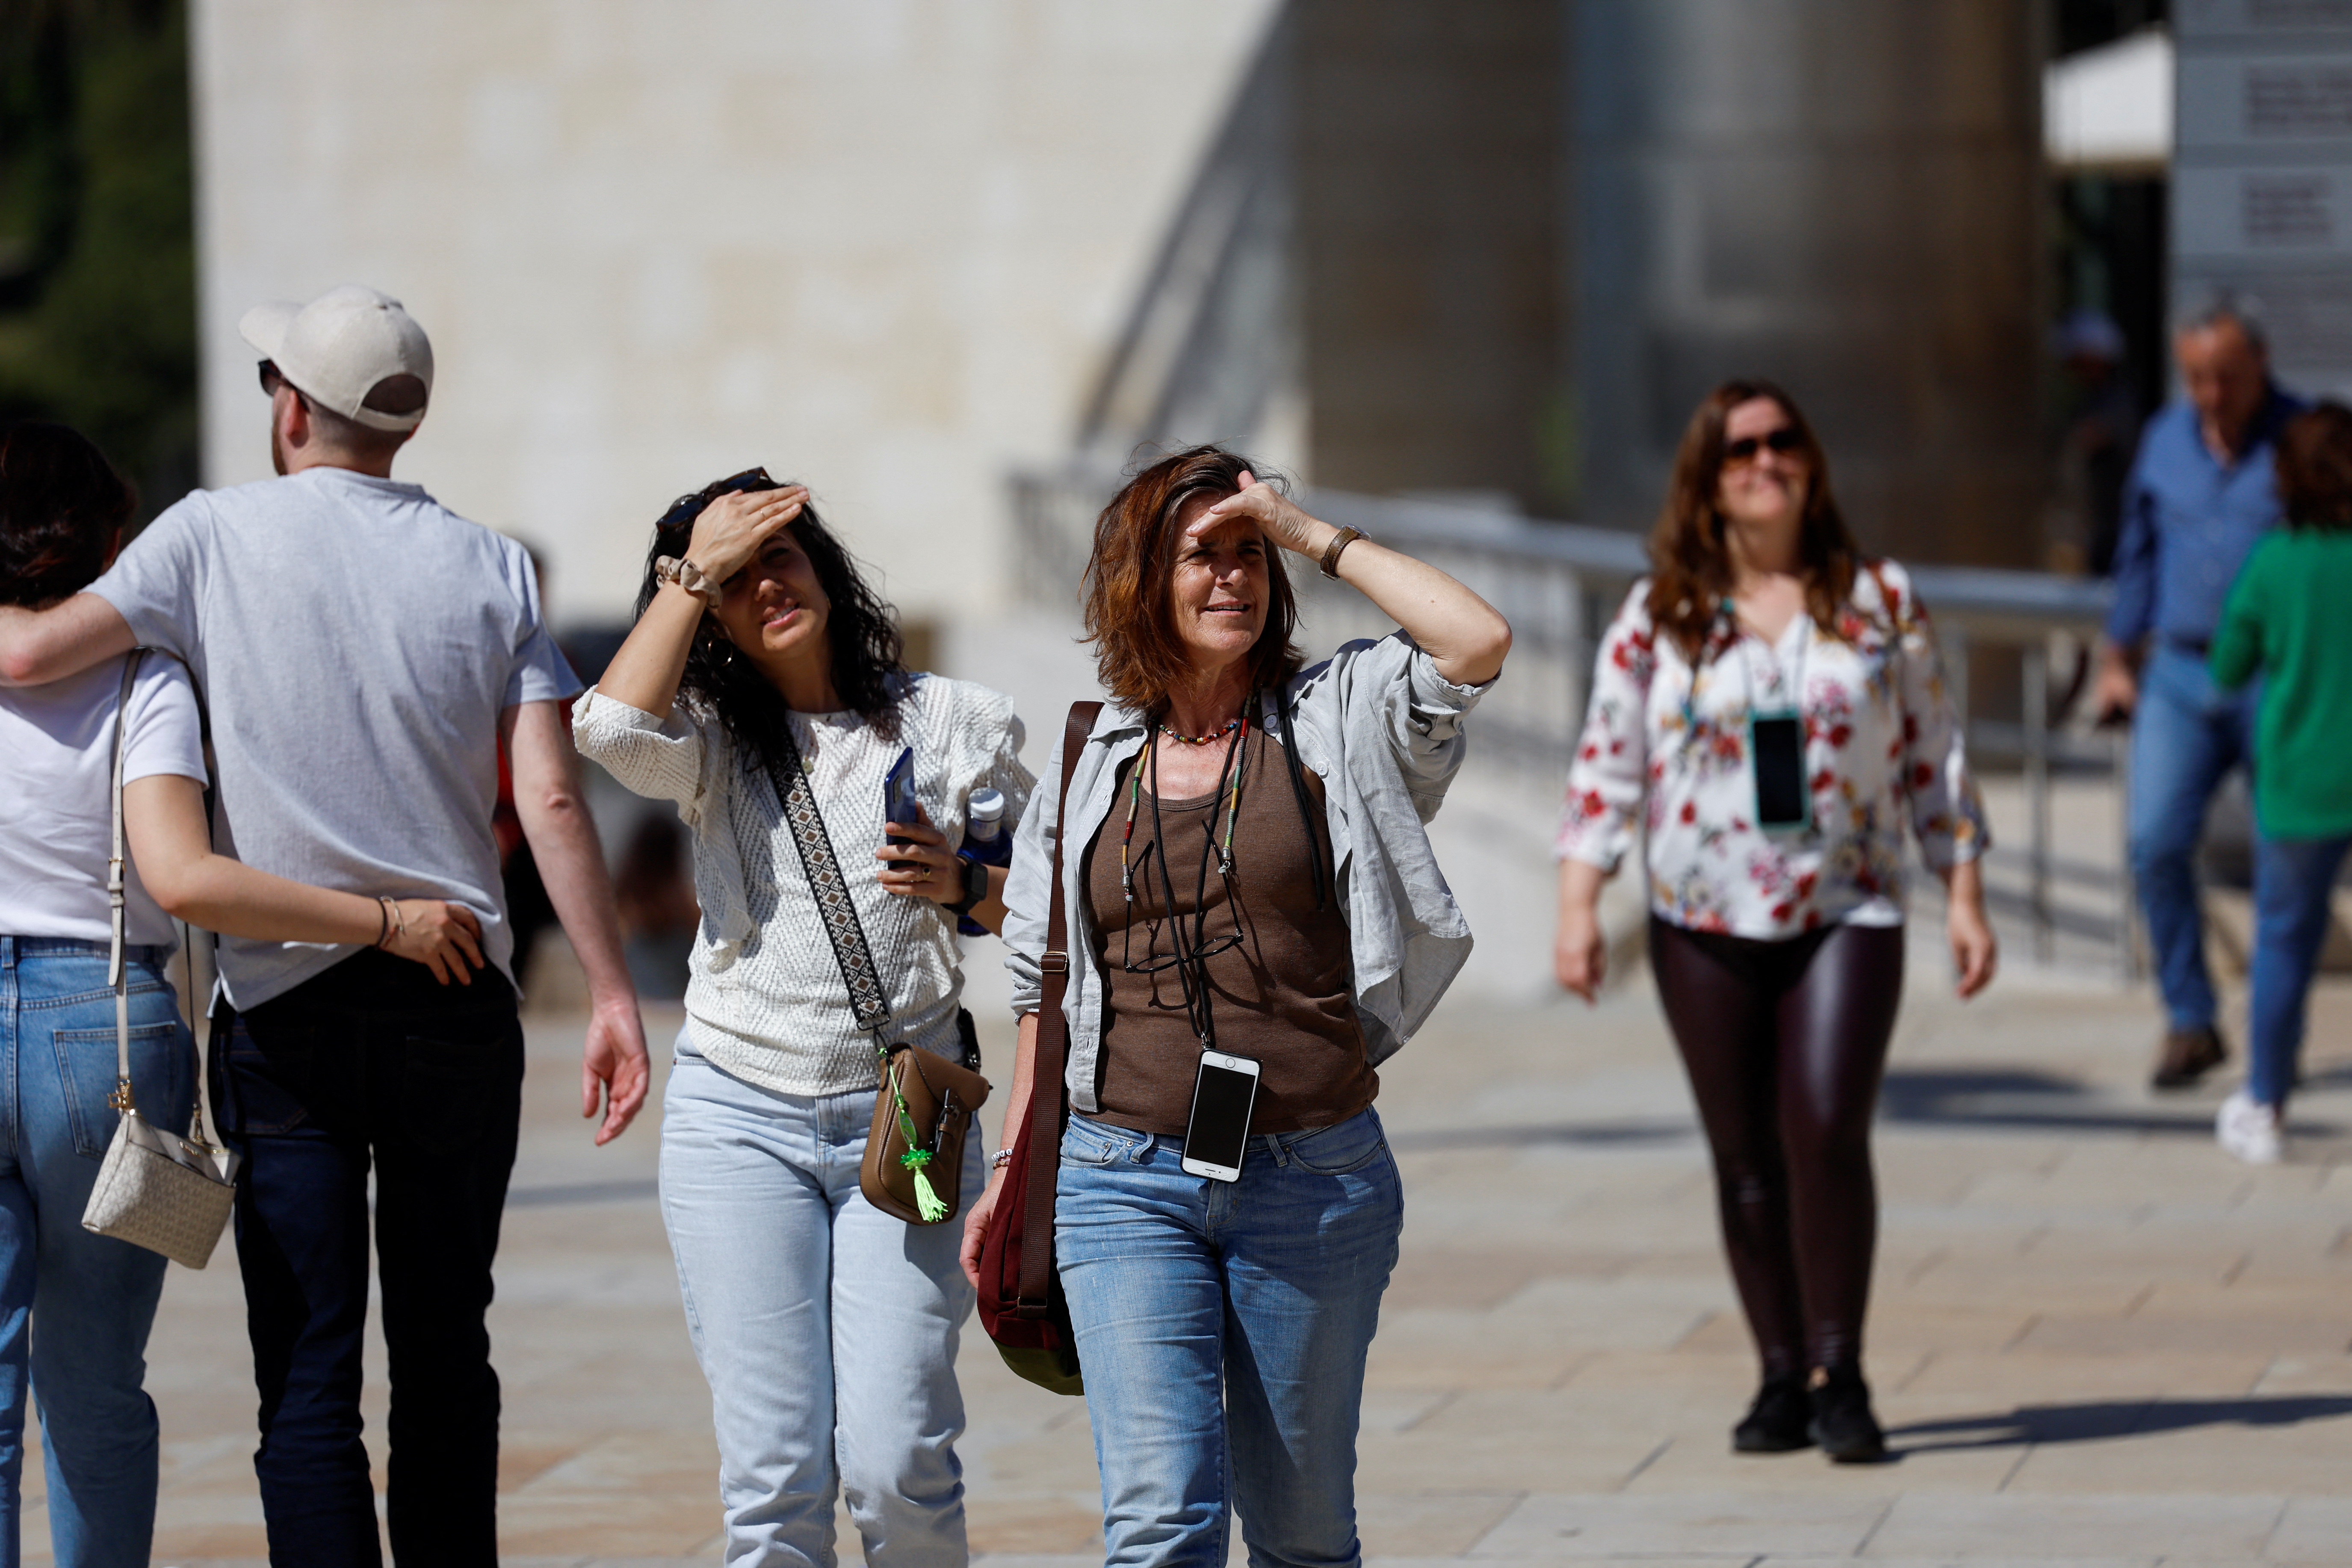 Northern Spain experiences unseasonably hot weather